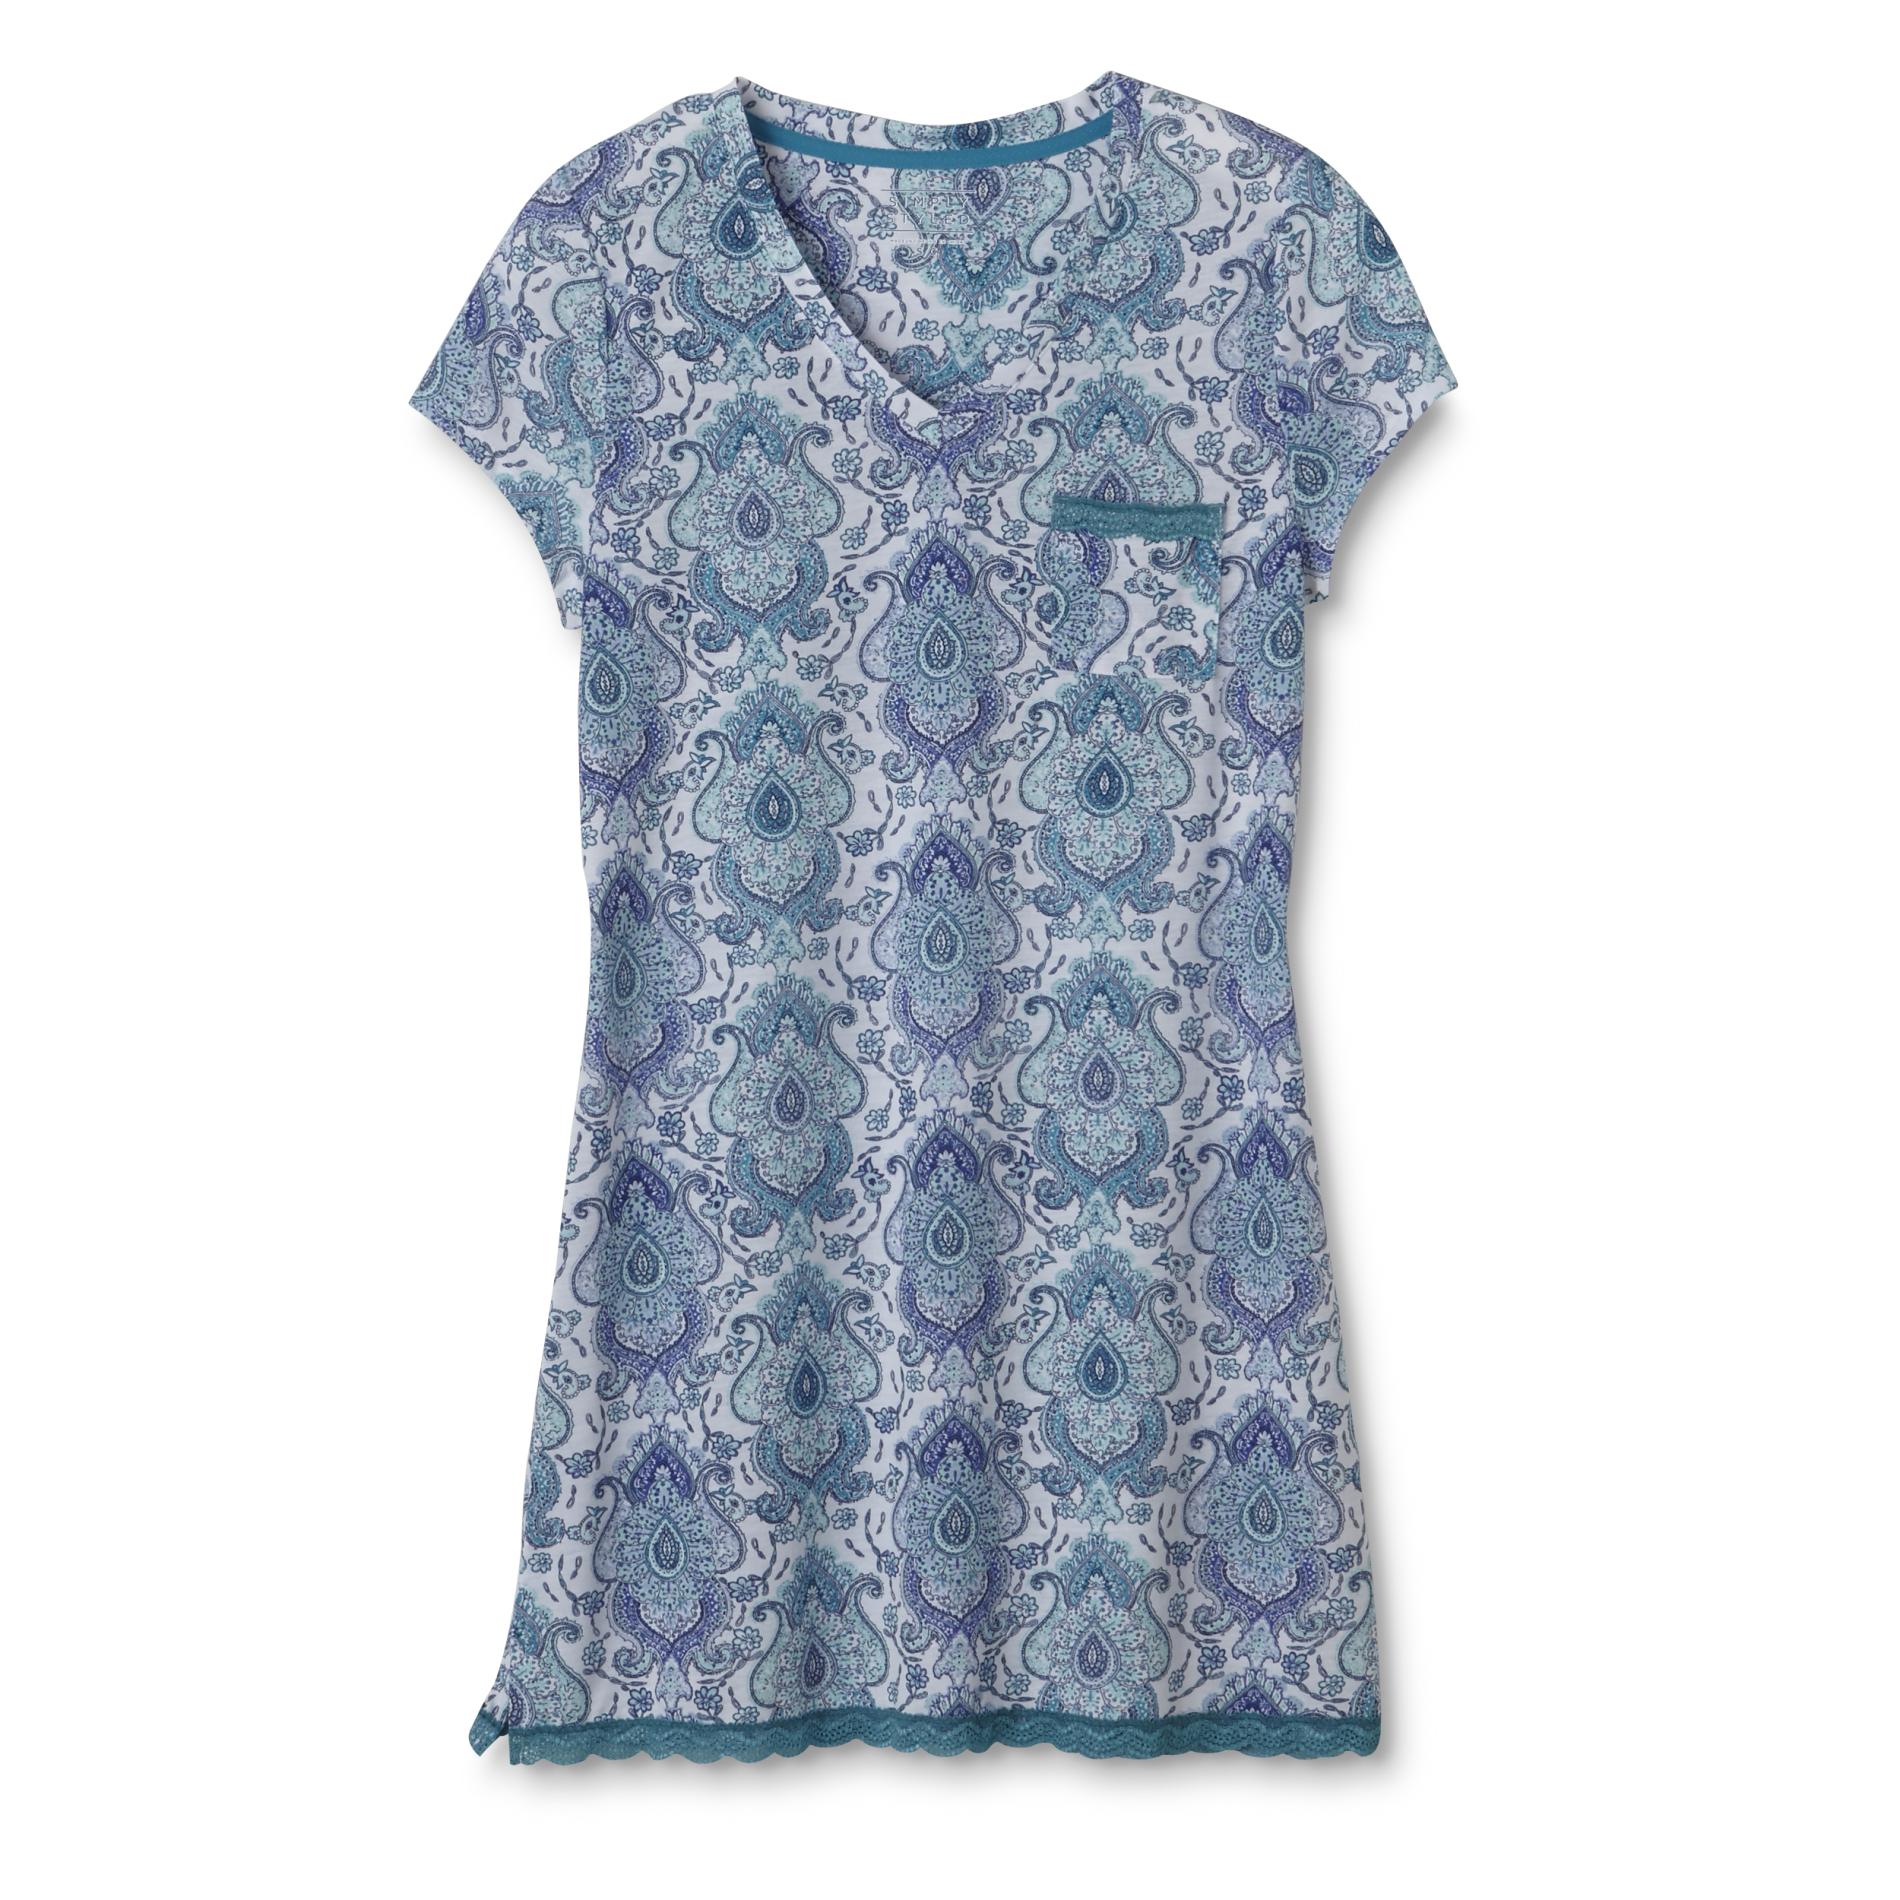 Simply Styled Women's Nightgown - Paisley